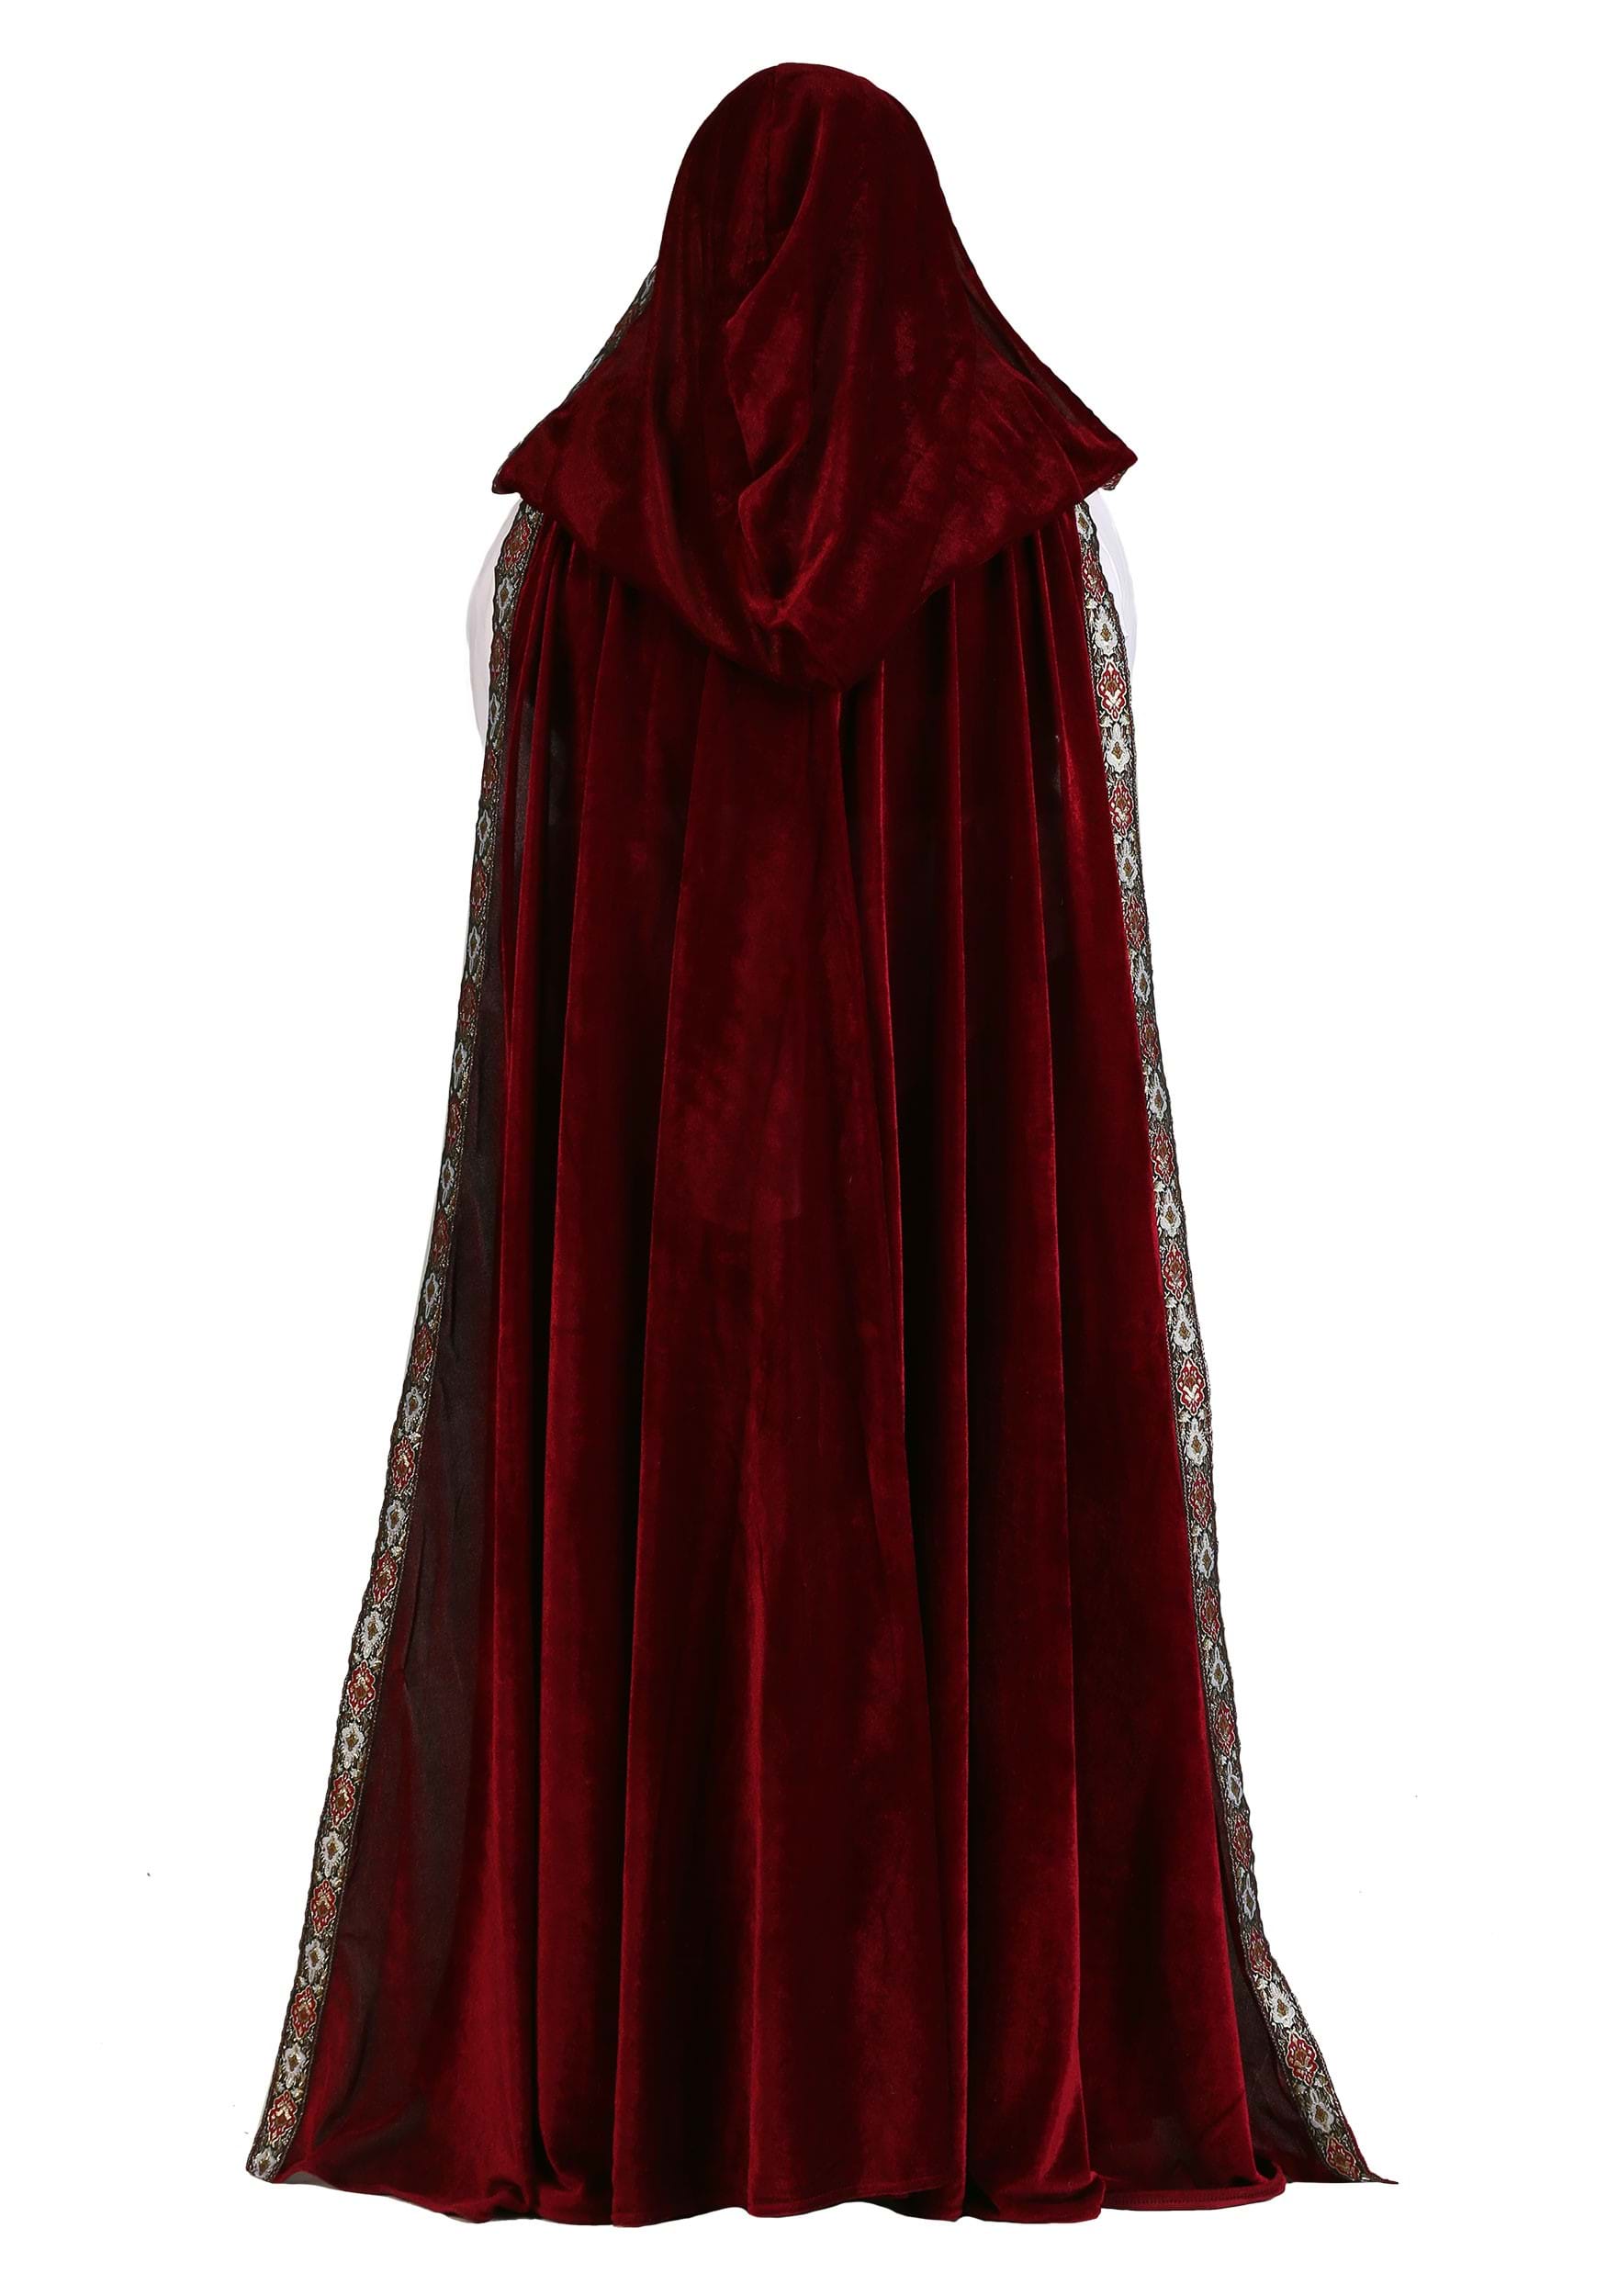 Deluxe Red Riding Hood Plus Size Women's Fancy Dress Costume , Exclusive